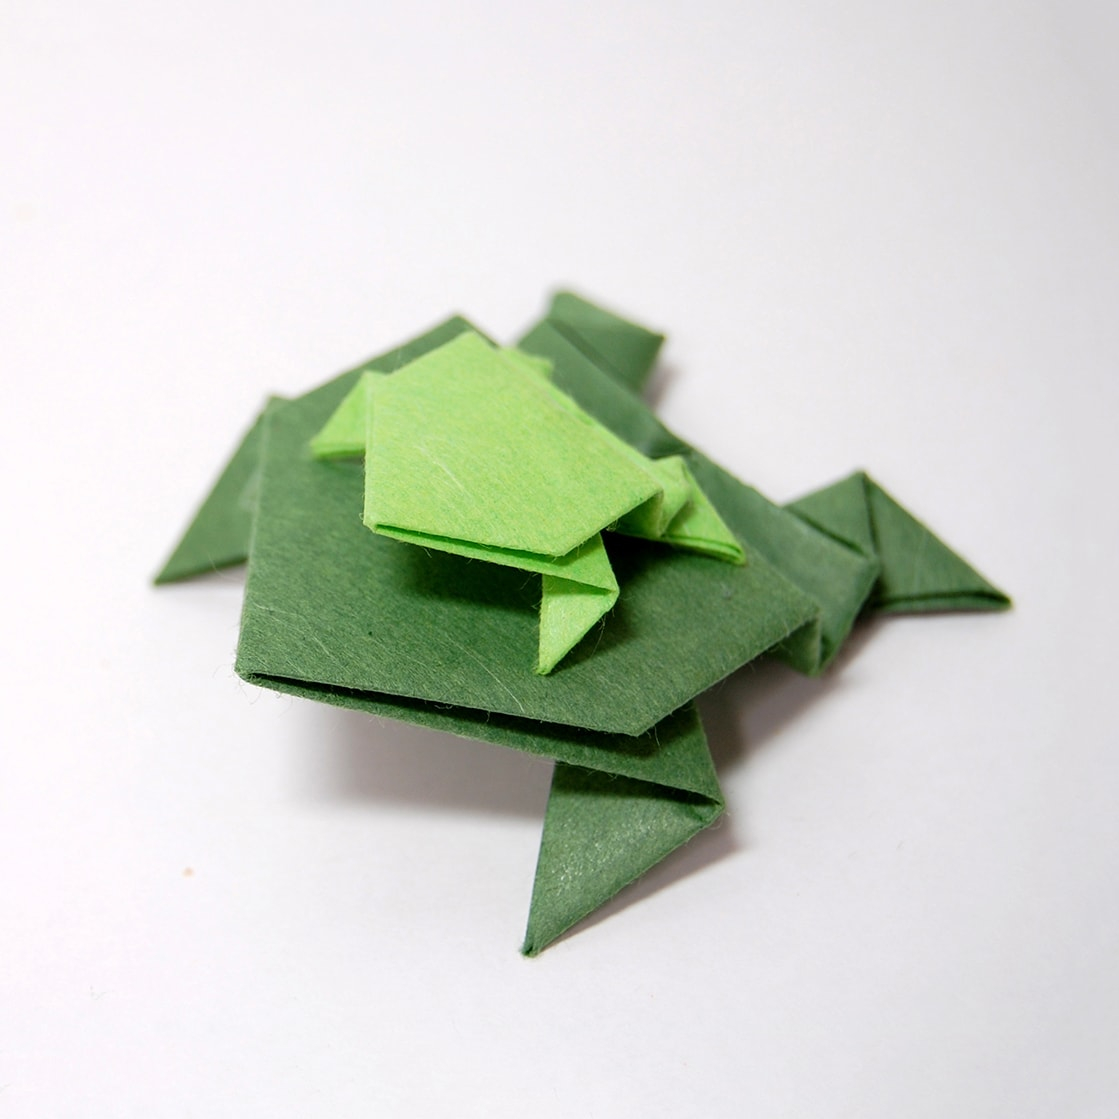 Origami Origami Origami Origami Learn Paper Folding Free Instructions More